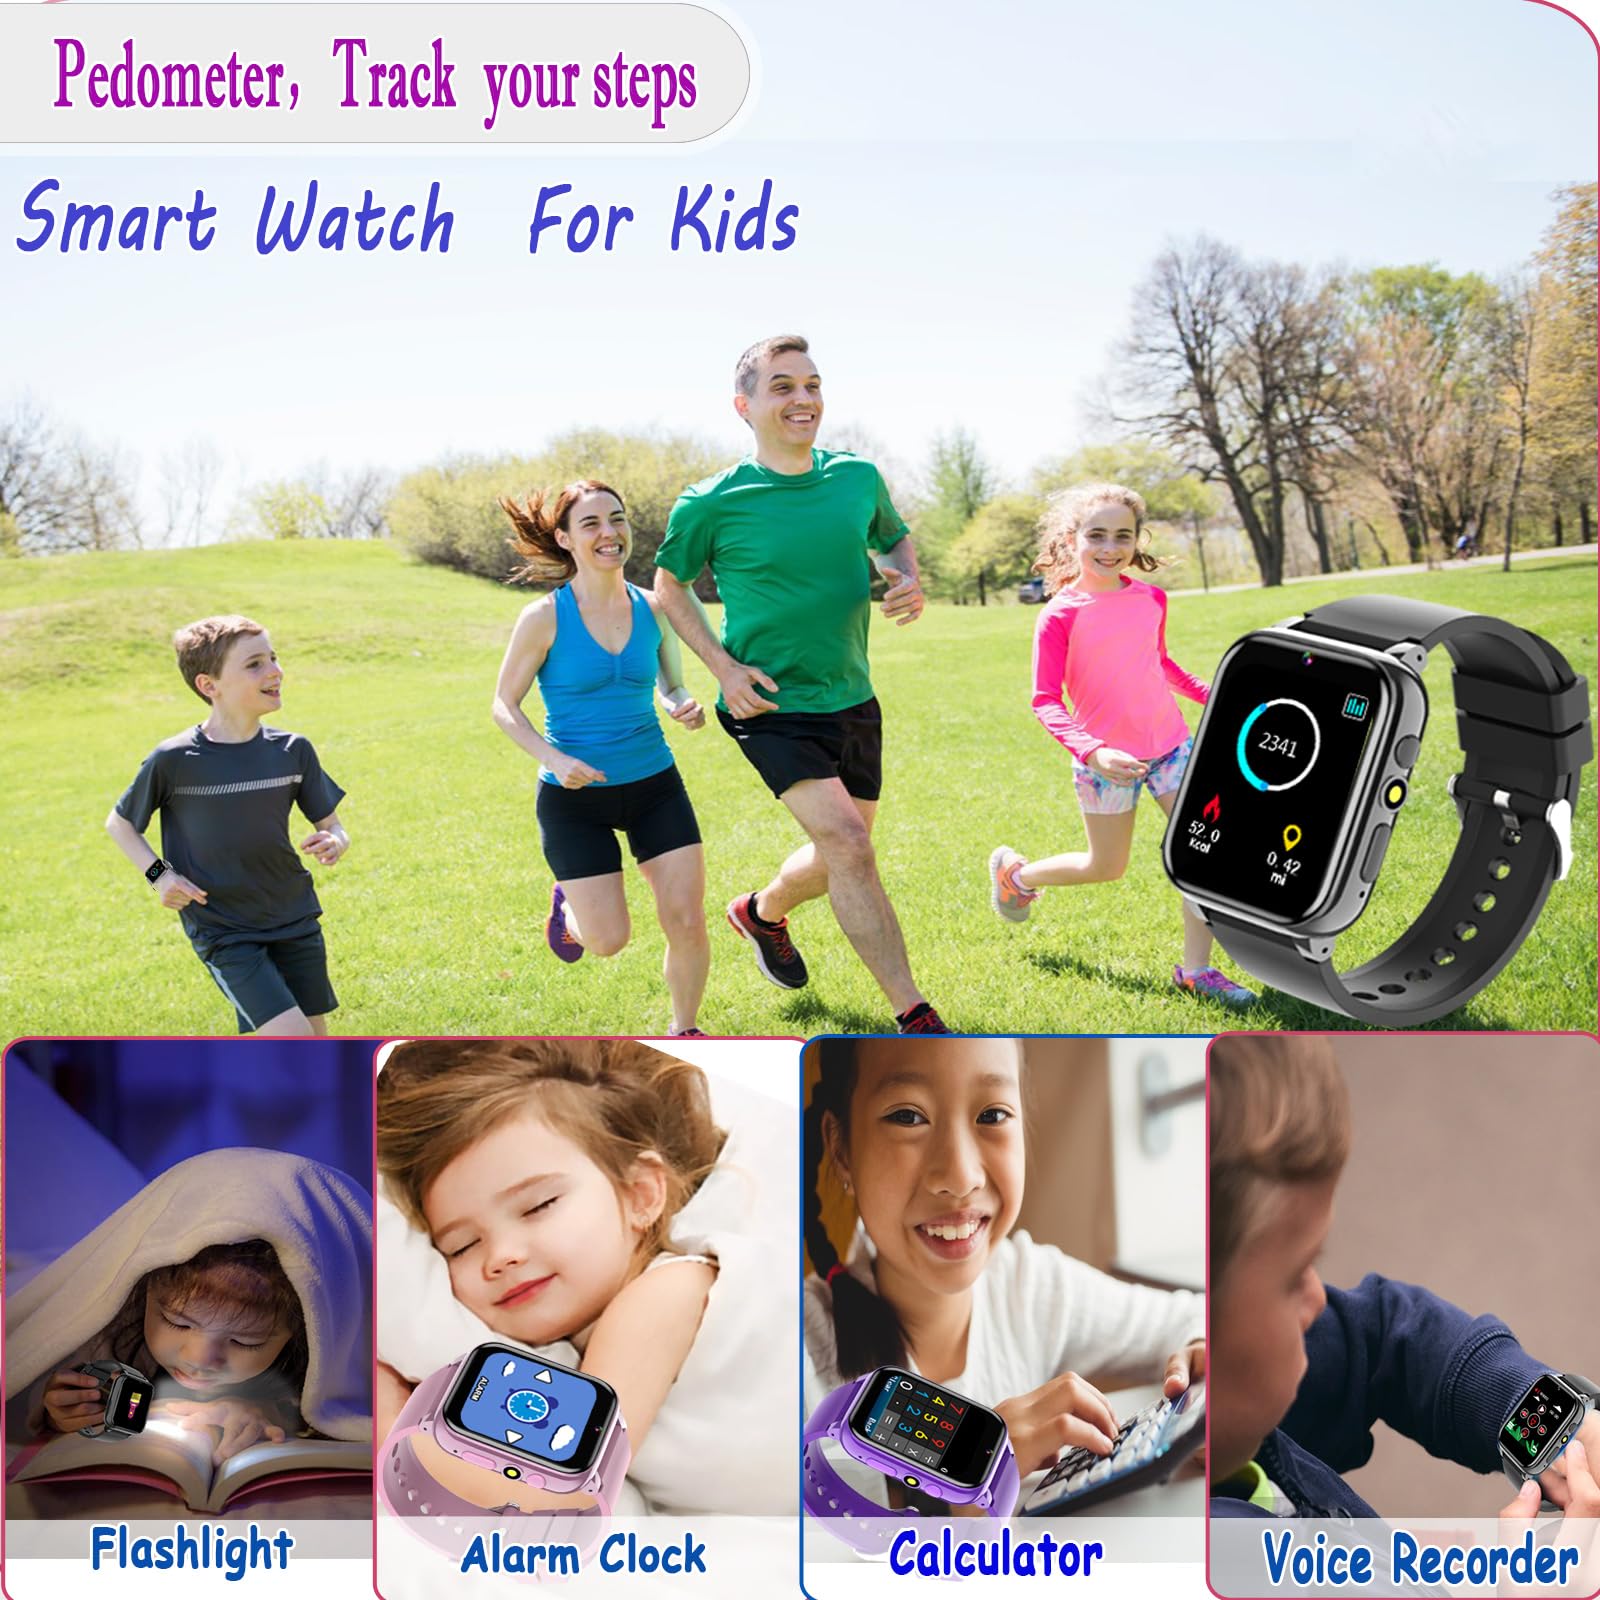 iCHOMKE Smart Watch for Kids, Girls Boys Smartwatch with 26 Games Camera Video Recorder and Player, Pedometer Calendar Flashlight, Audio Book etc., Gifts for 4-12 Years Children (Black)